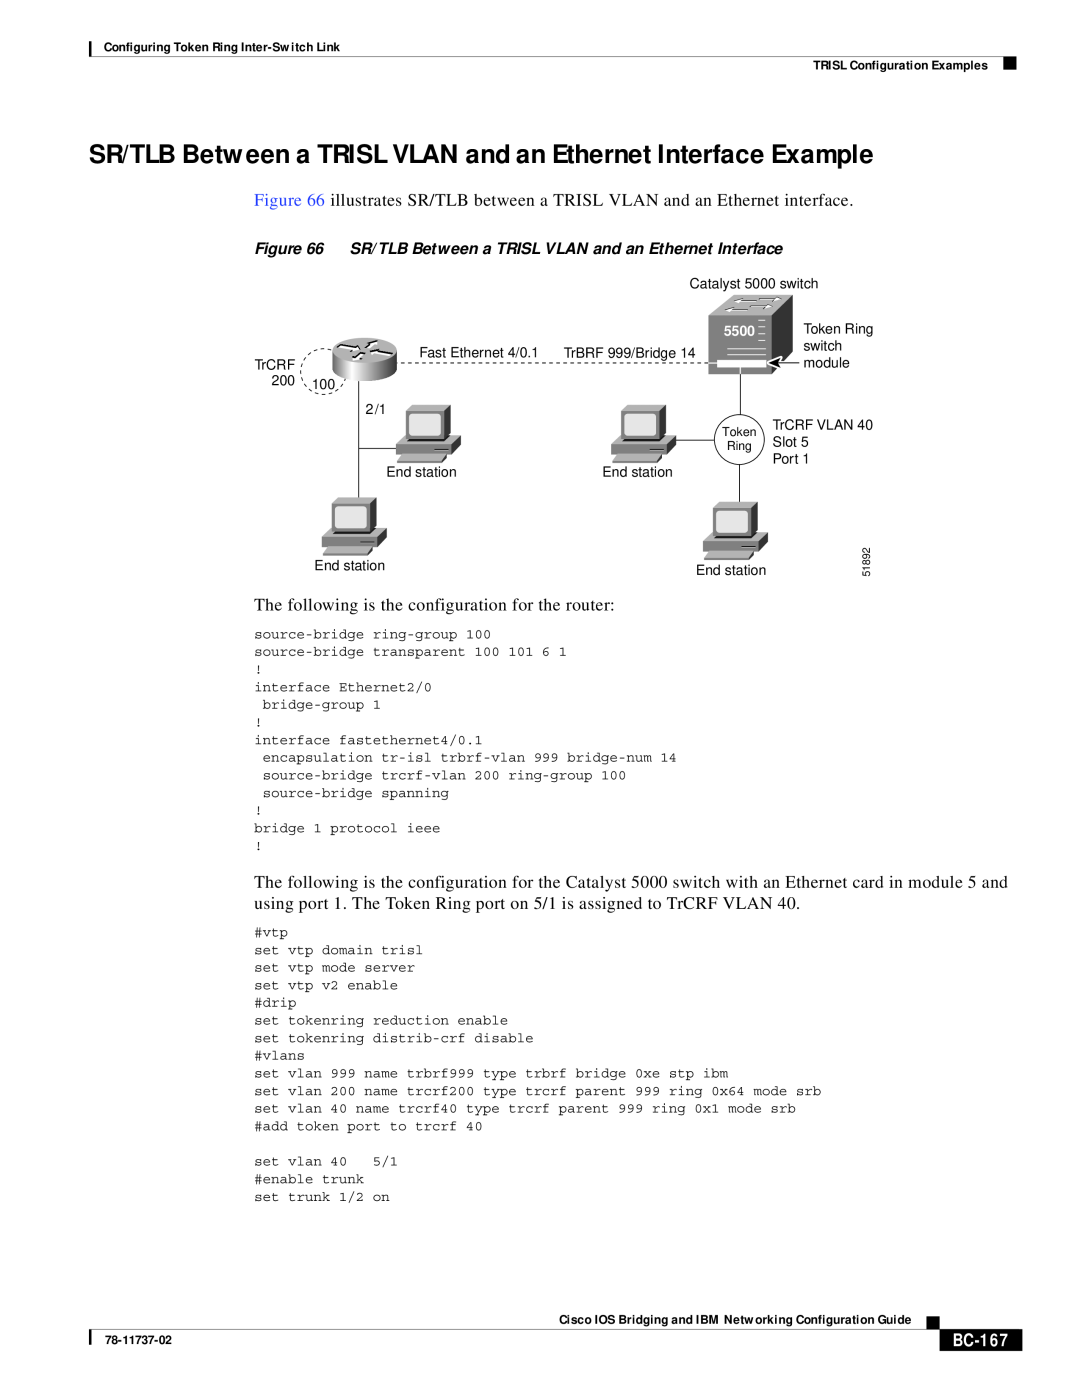 Cisco Systems BC-145 manual SR/TLB Between a TRISL VLAN and an Ethernet Interface Example, BC-167 